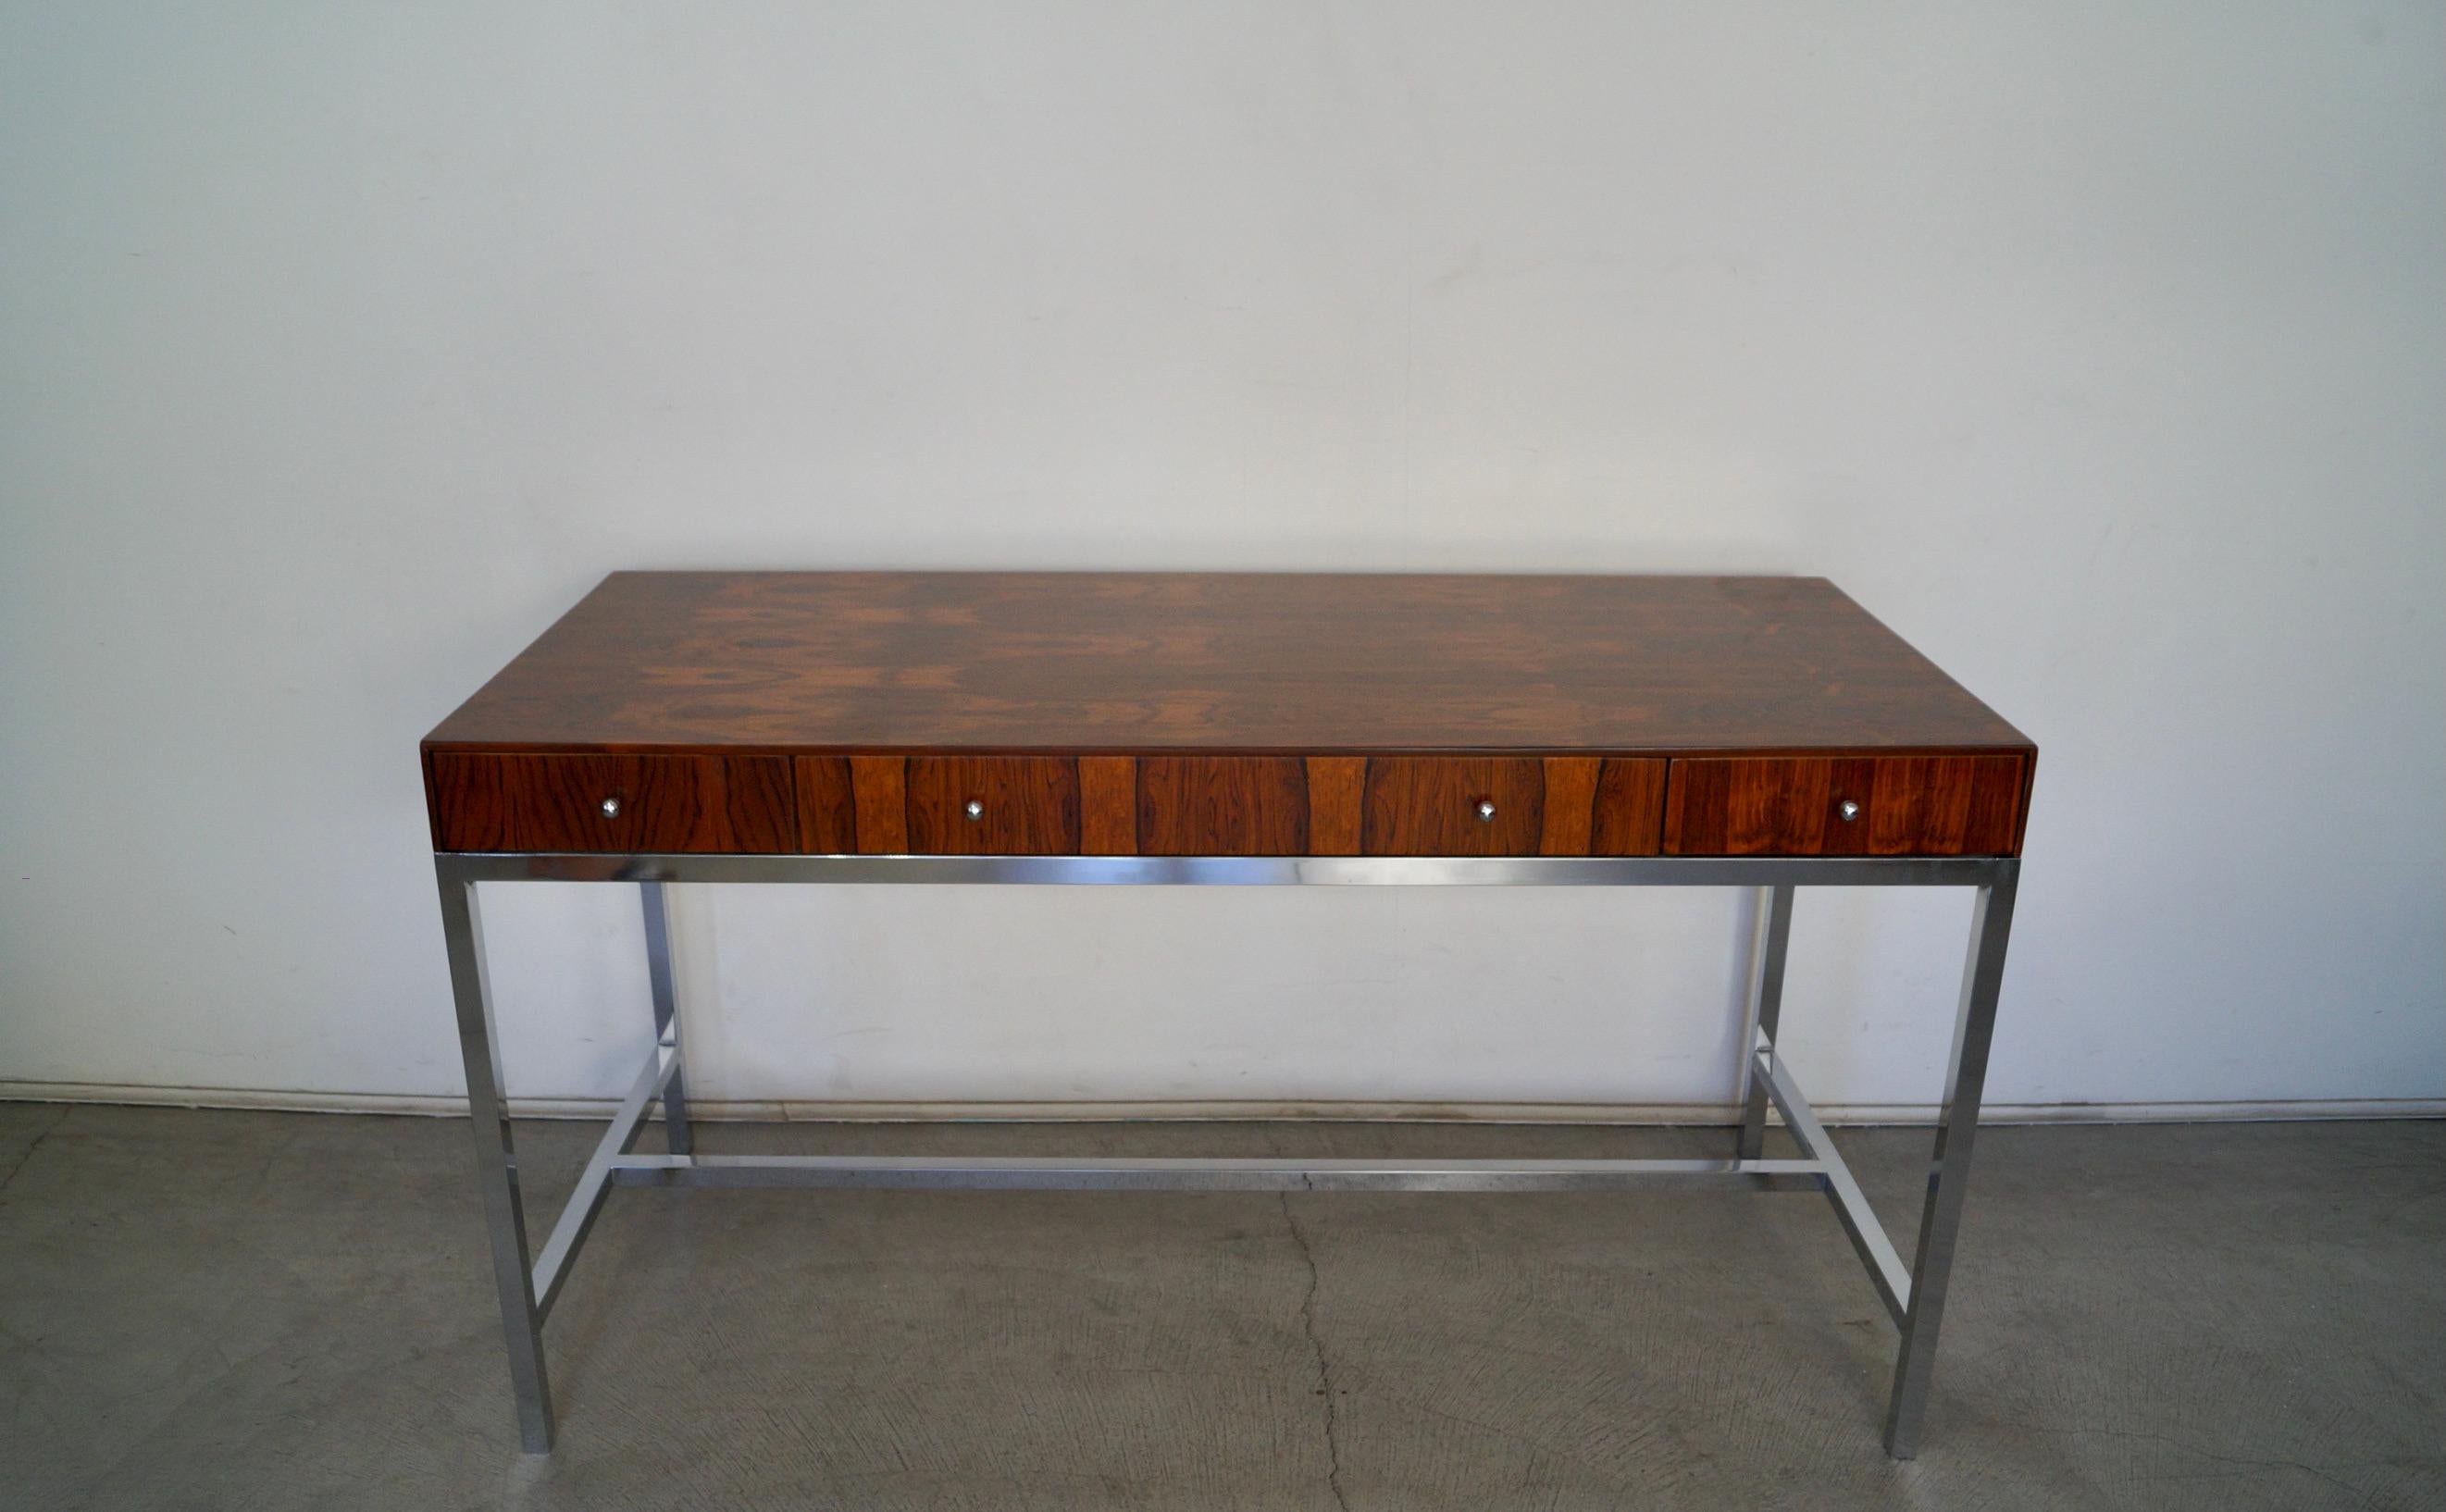 Vintage 1960's Mid-century Modern rosewood desk for sale. It has been professionally refinished, and looks stunning. The chrome base has been polished and is also in excellent top shape. It has a clean design with three drawers and chrome knobs.